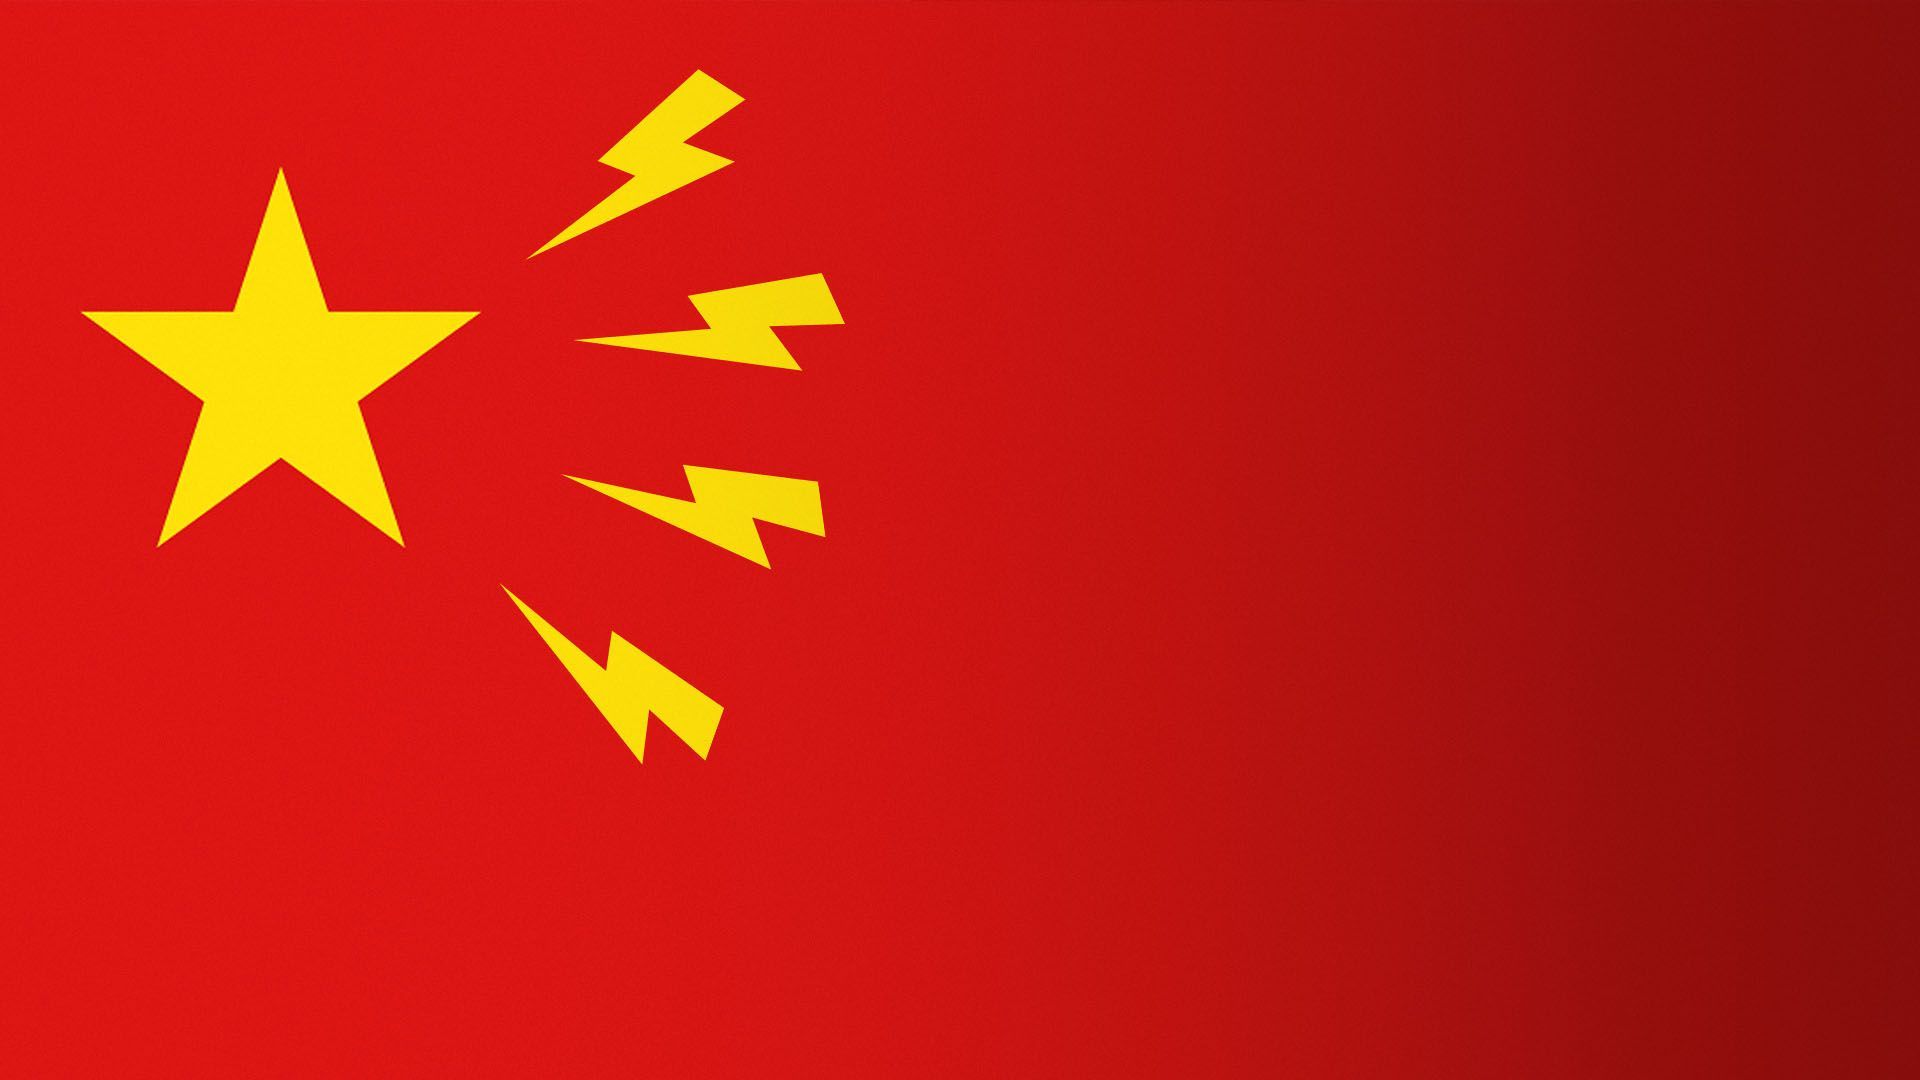 Illustration of China's flag with lightning bolts replacing the four small stars.